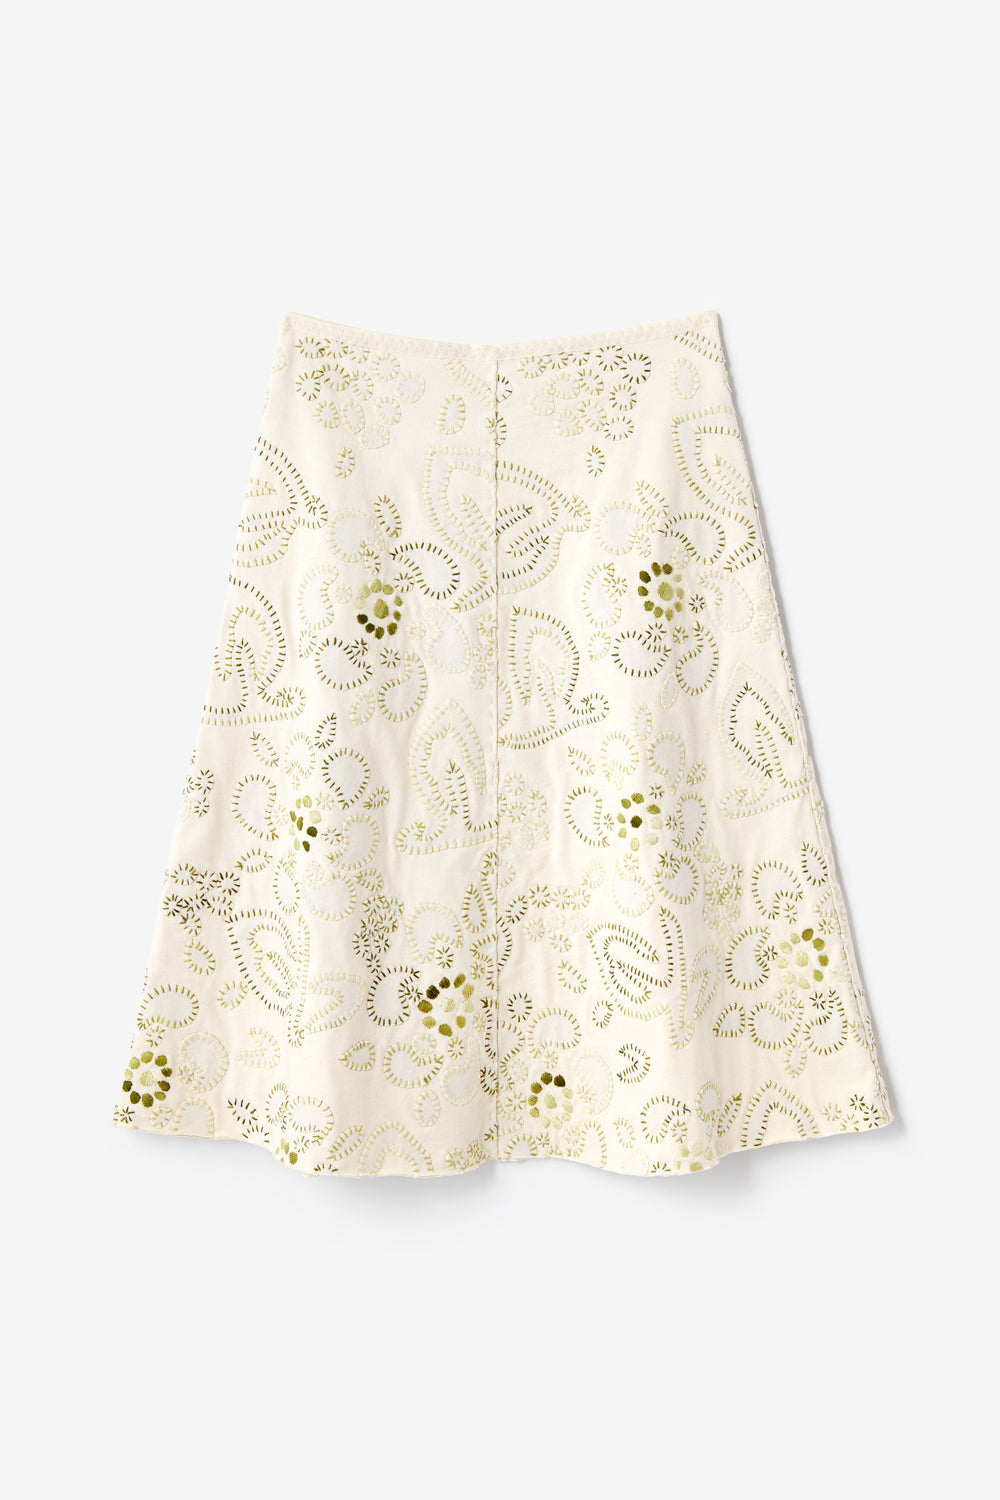 Swing Skirt in Natural with Daisy stencil and green stitching.